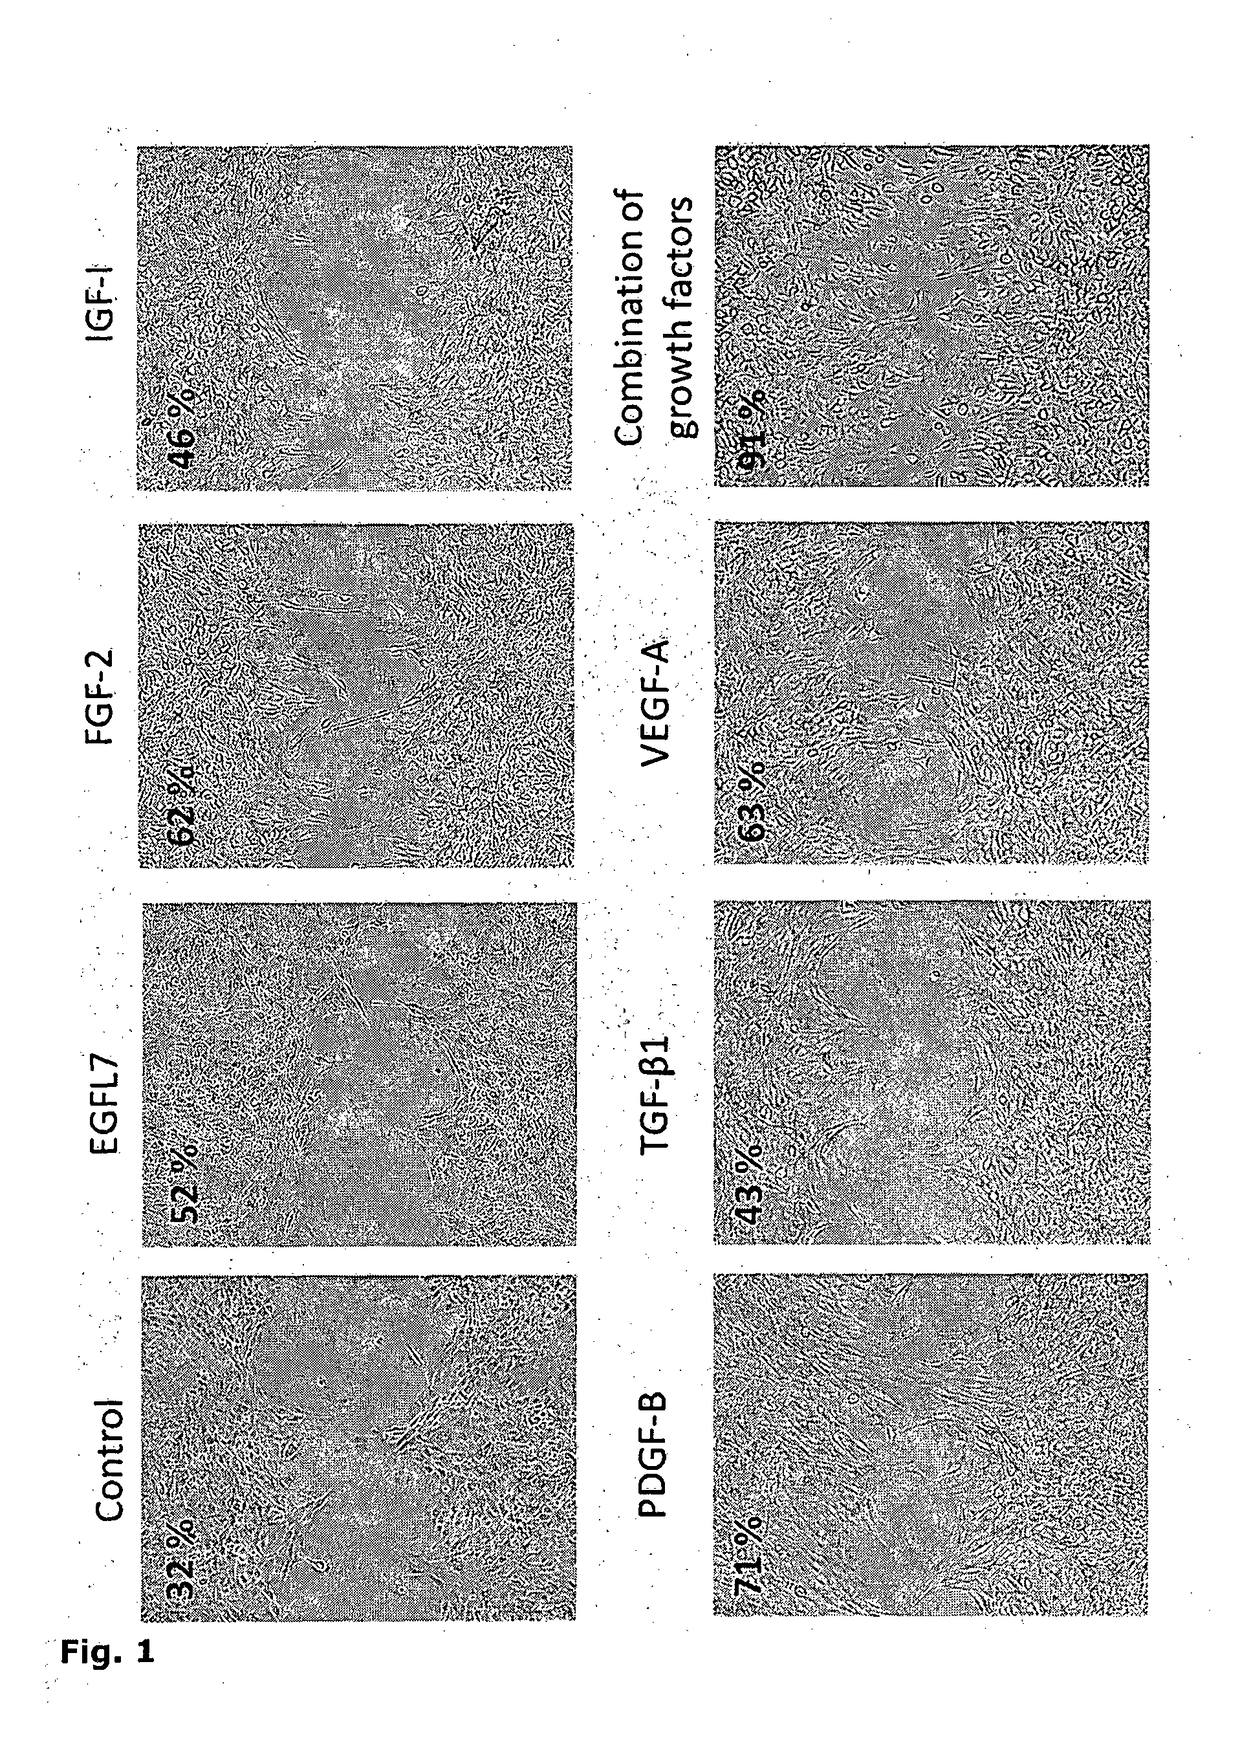 Cell-Based Device For Local Treatment With Therapeutic Protein